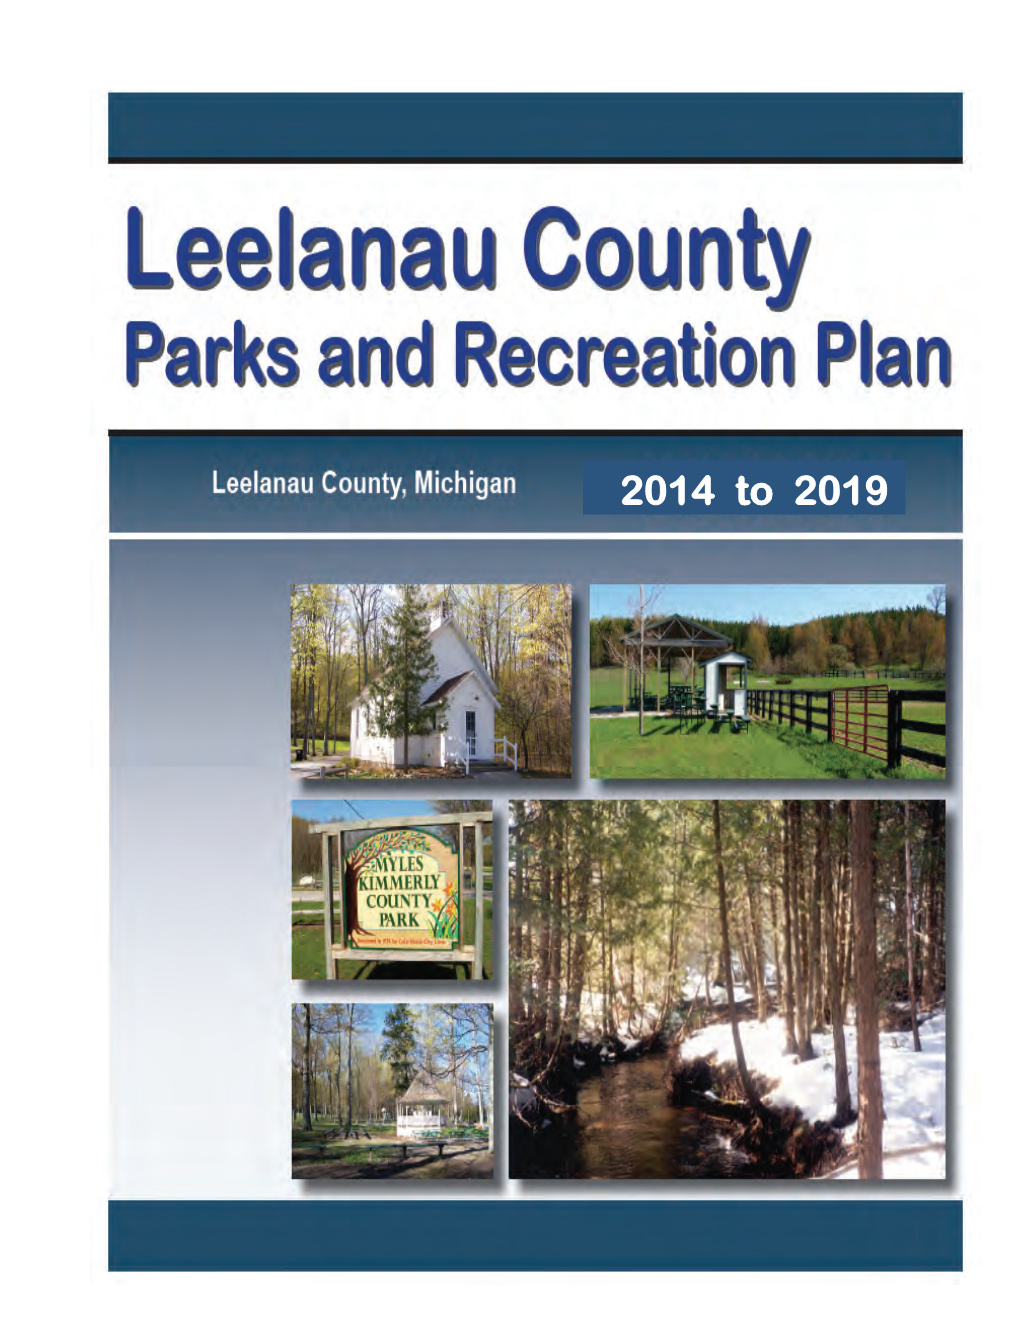 Leelanau County Parks and Recreation Plan 2014 to 2019